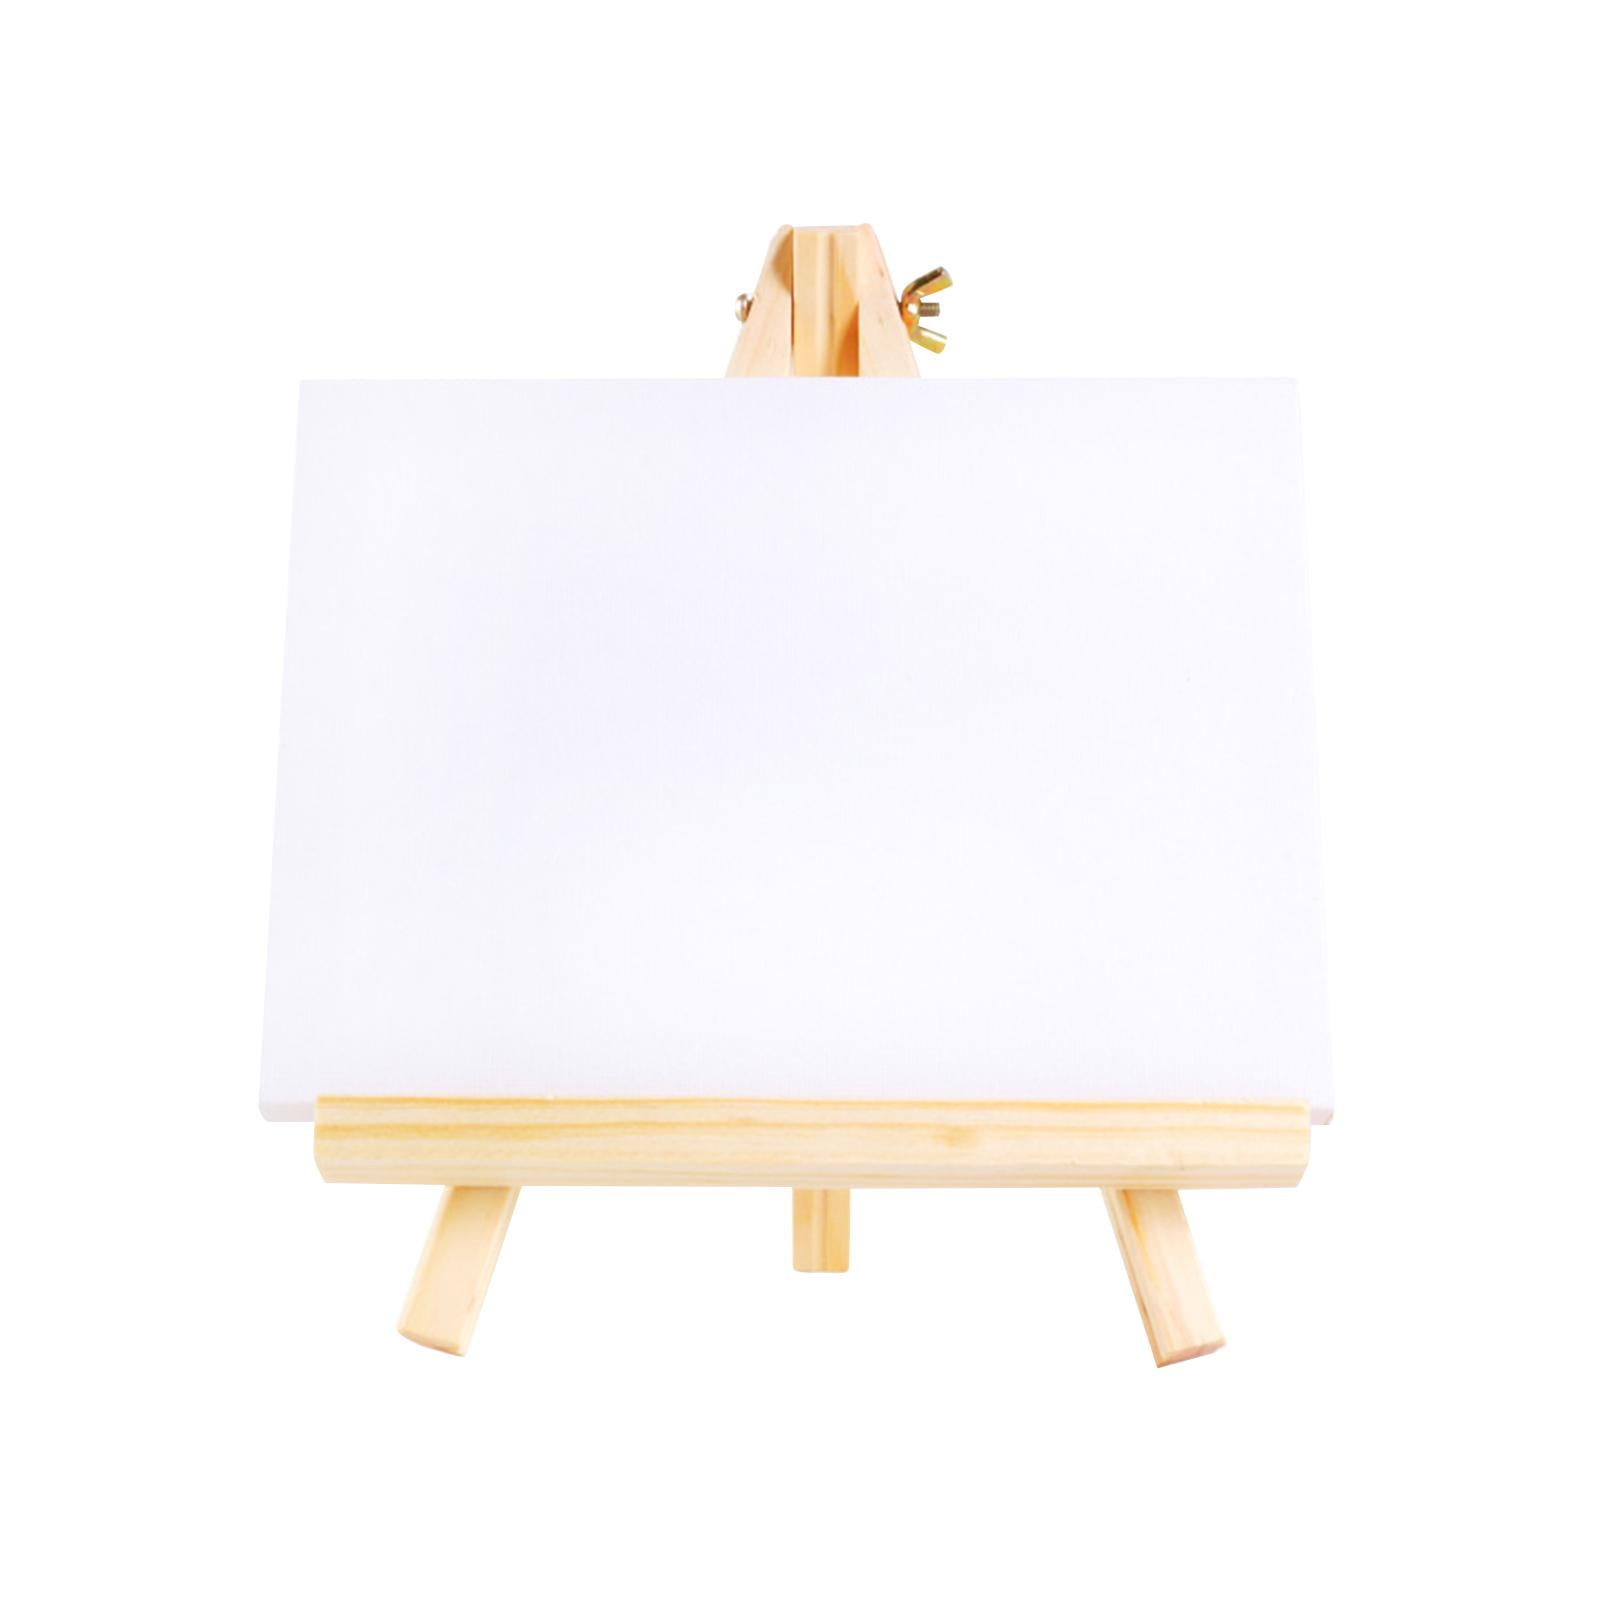 3 Canvas With Mini Wood Pallets Display Easel Artist Tripod Tabletop Holder  Stand For Painting Kids Crafts Photos KDJK2302 From Santi, $0.45